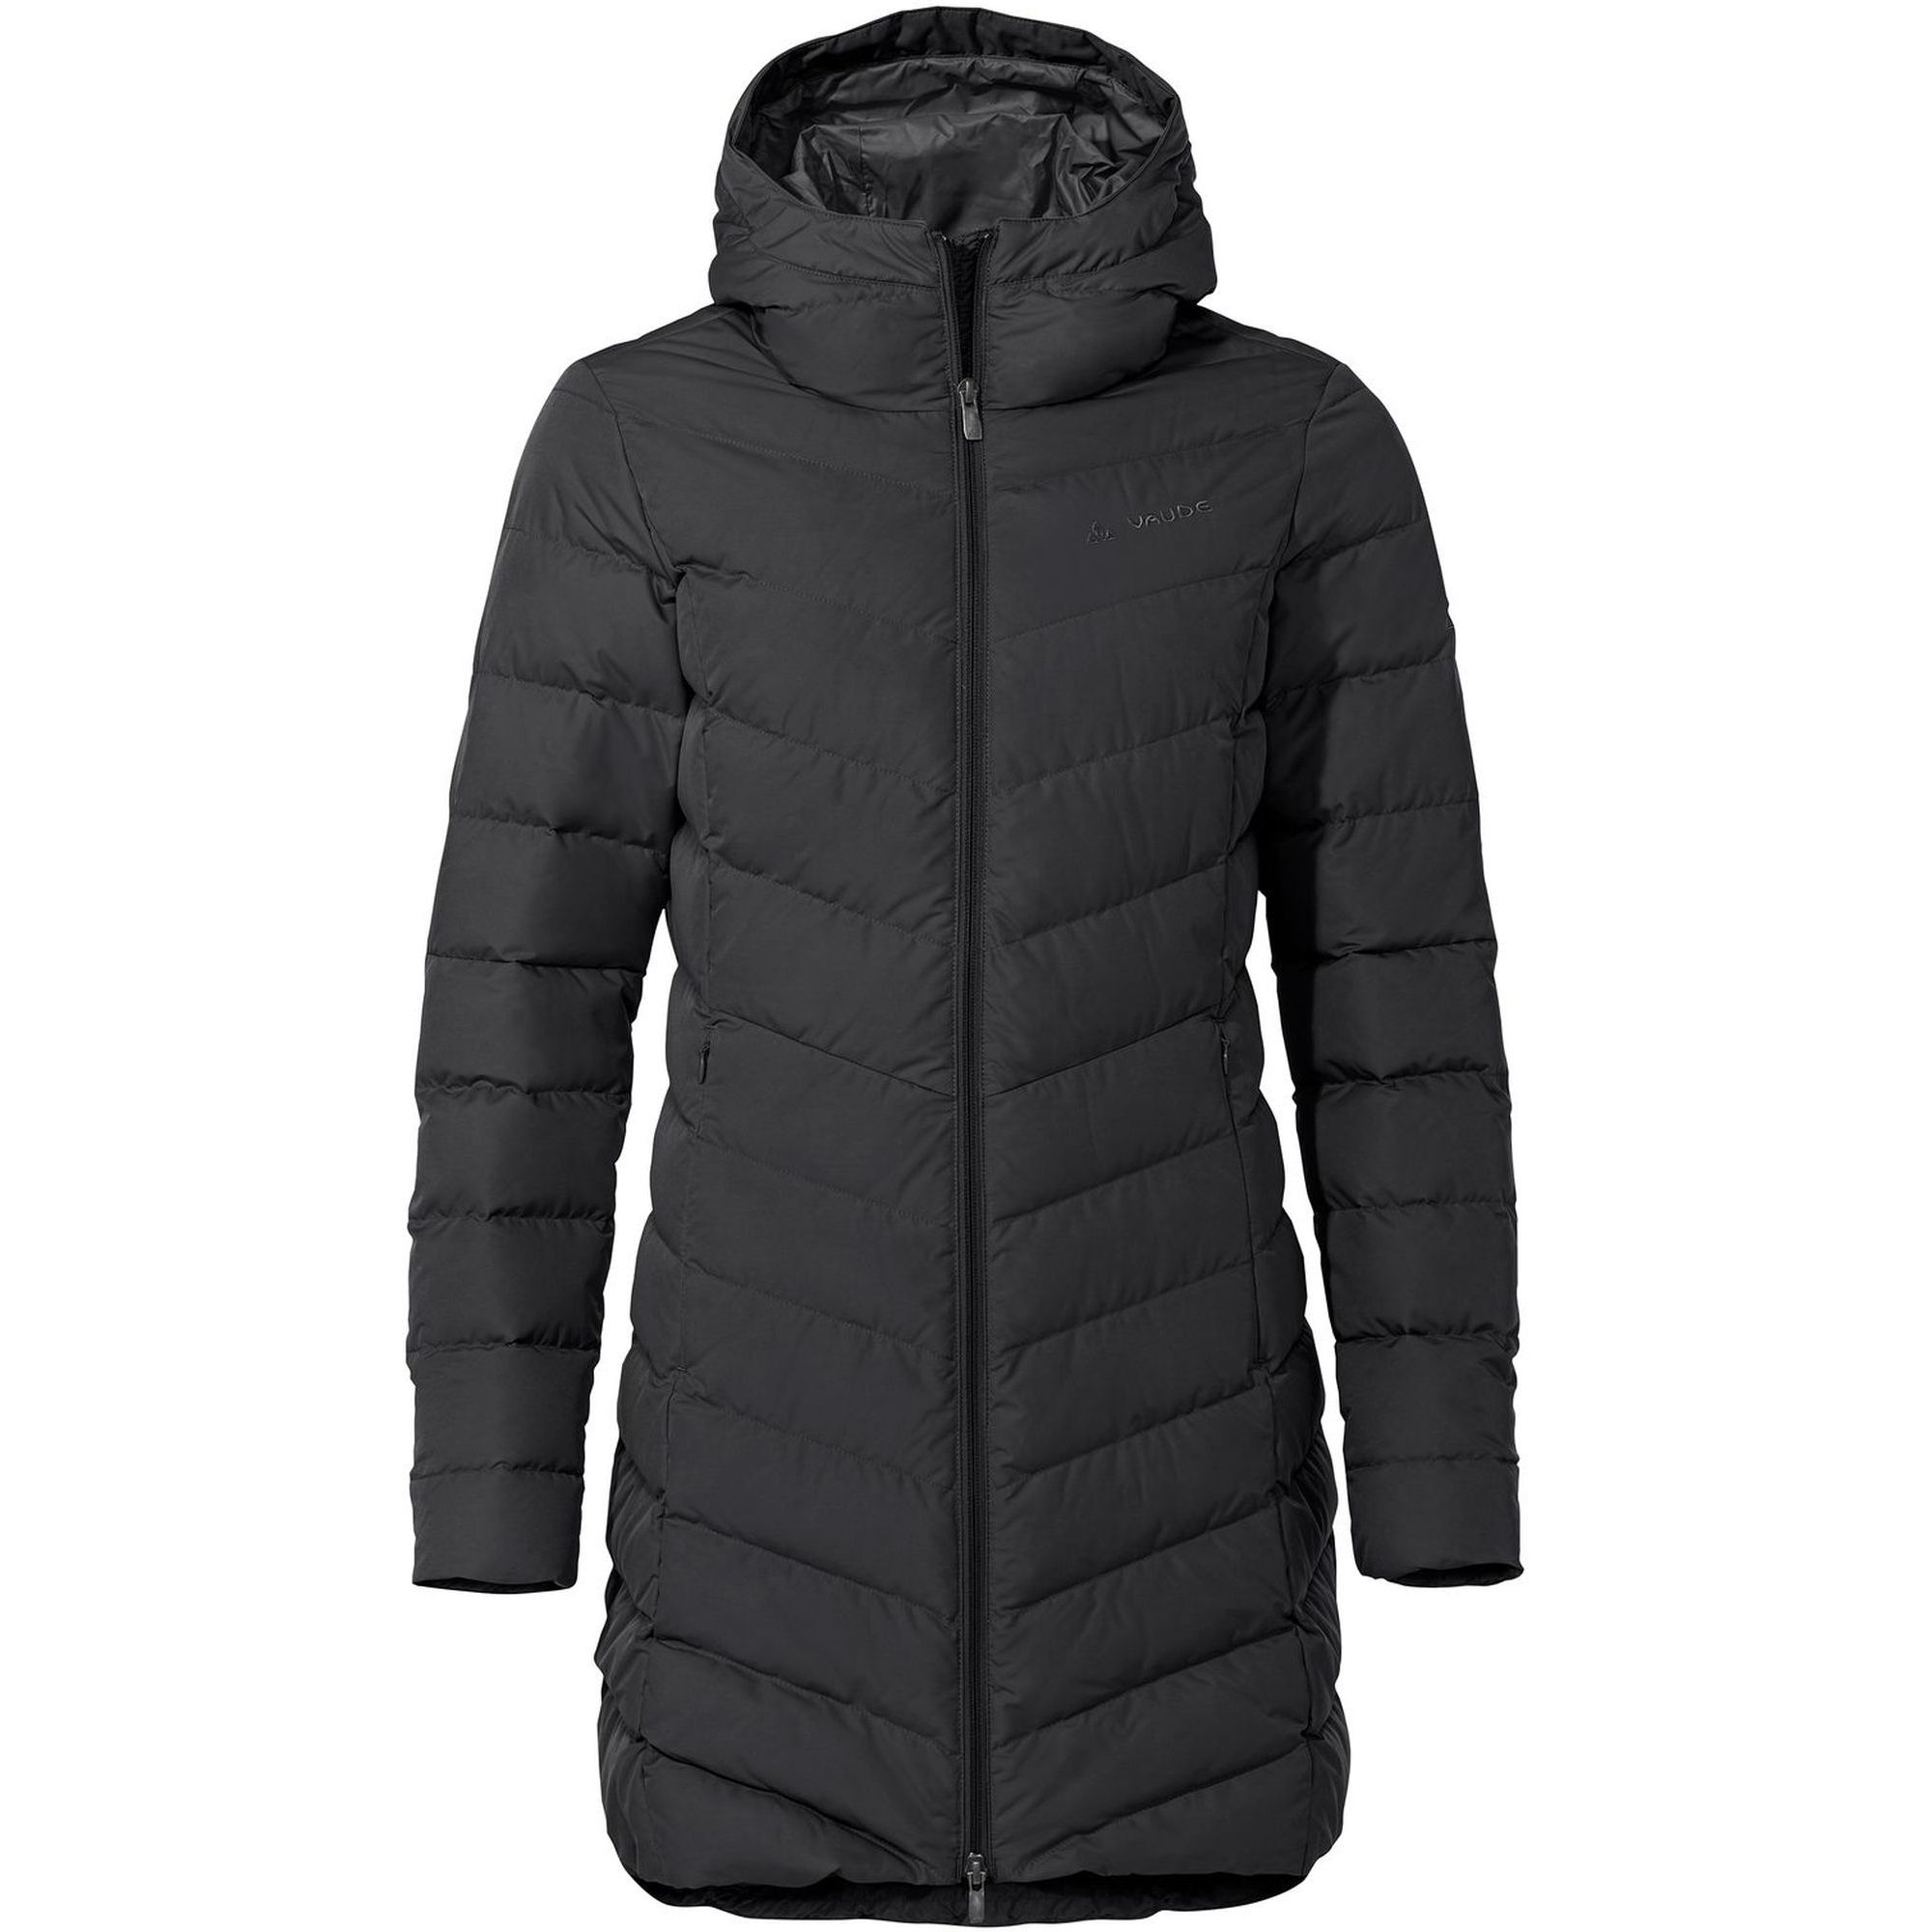 Wo Annecy Down Coat